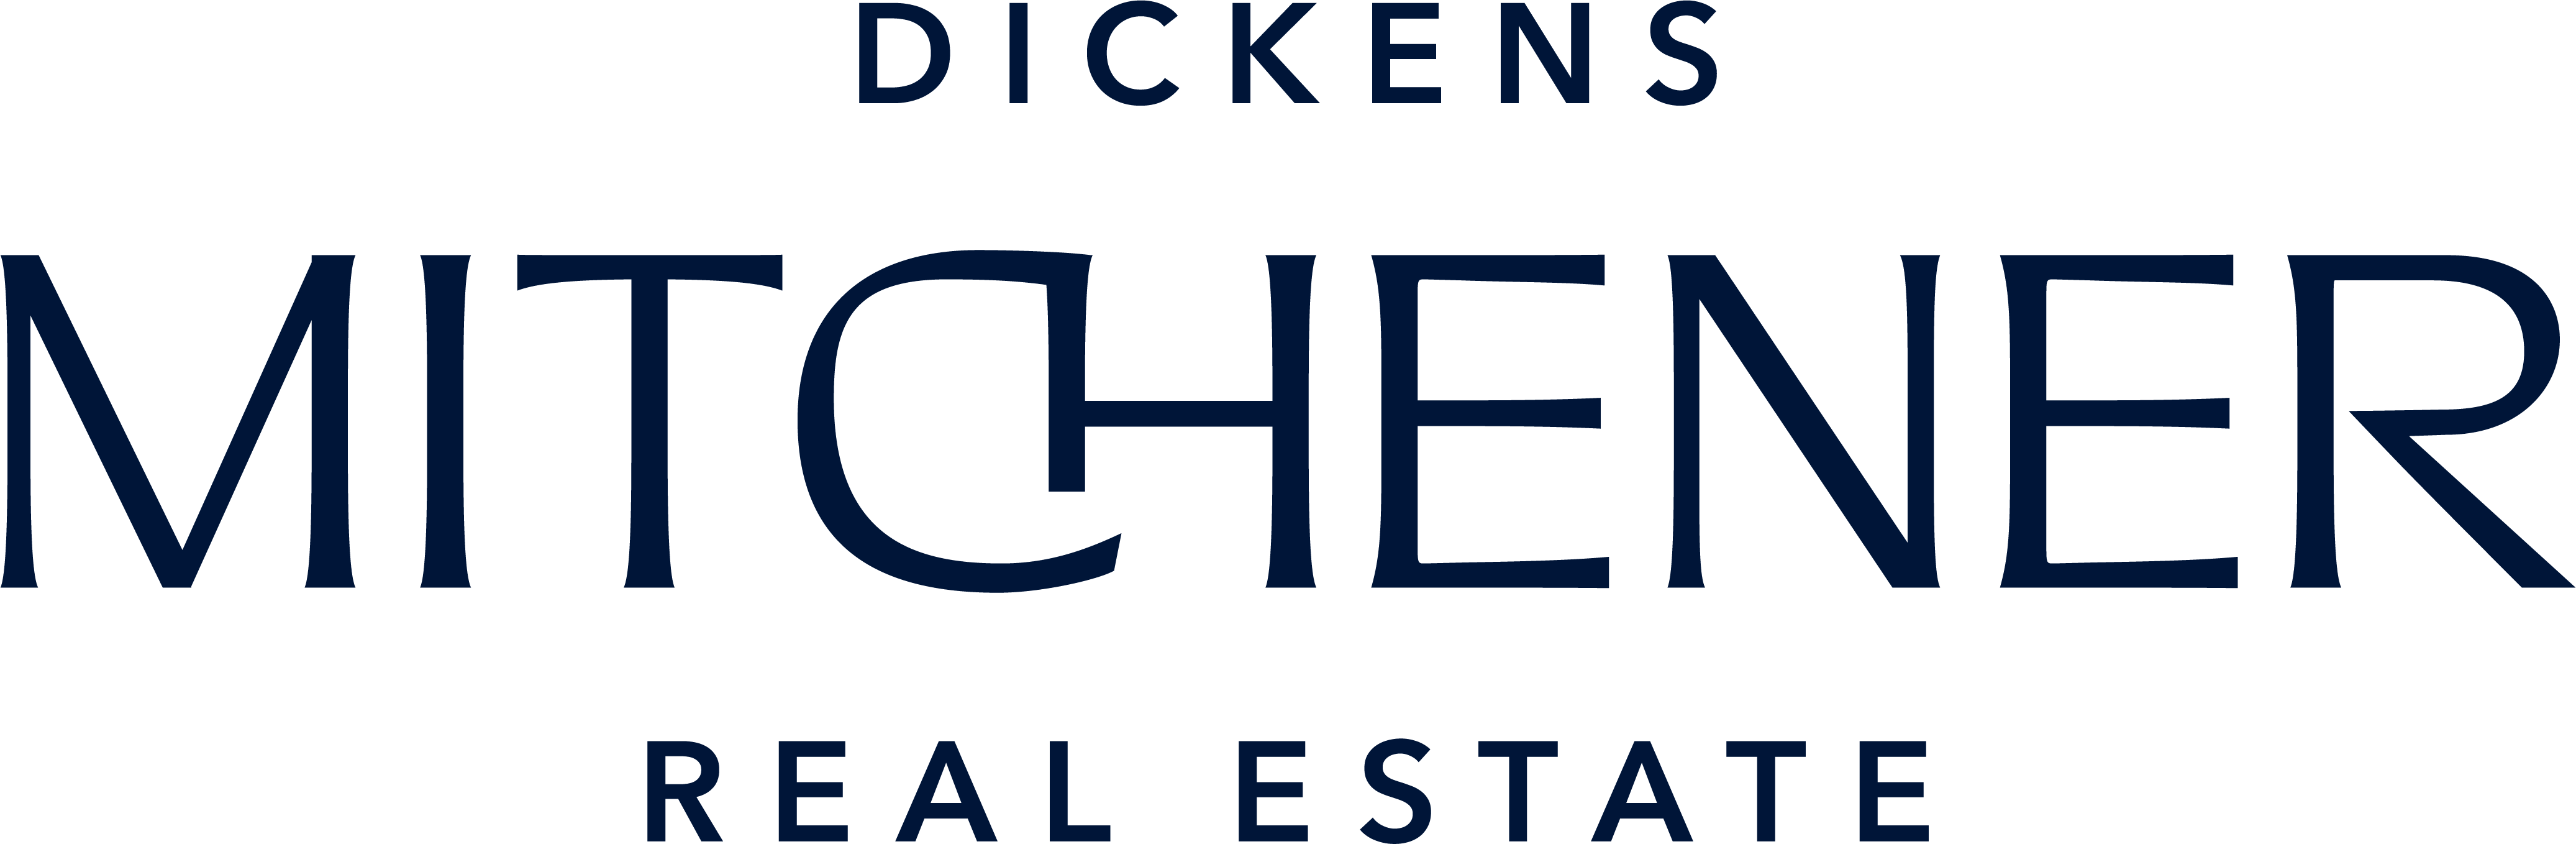 Dickens-Mitchener residential real estate